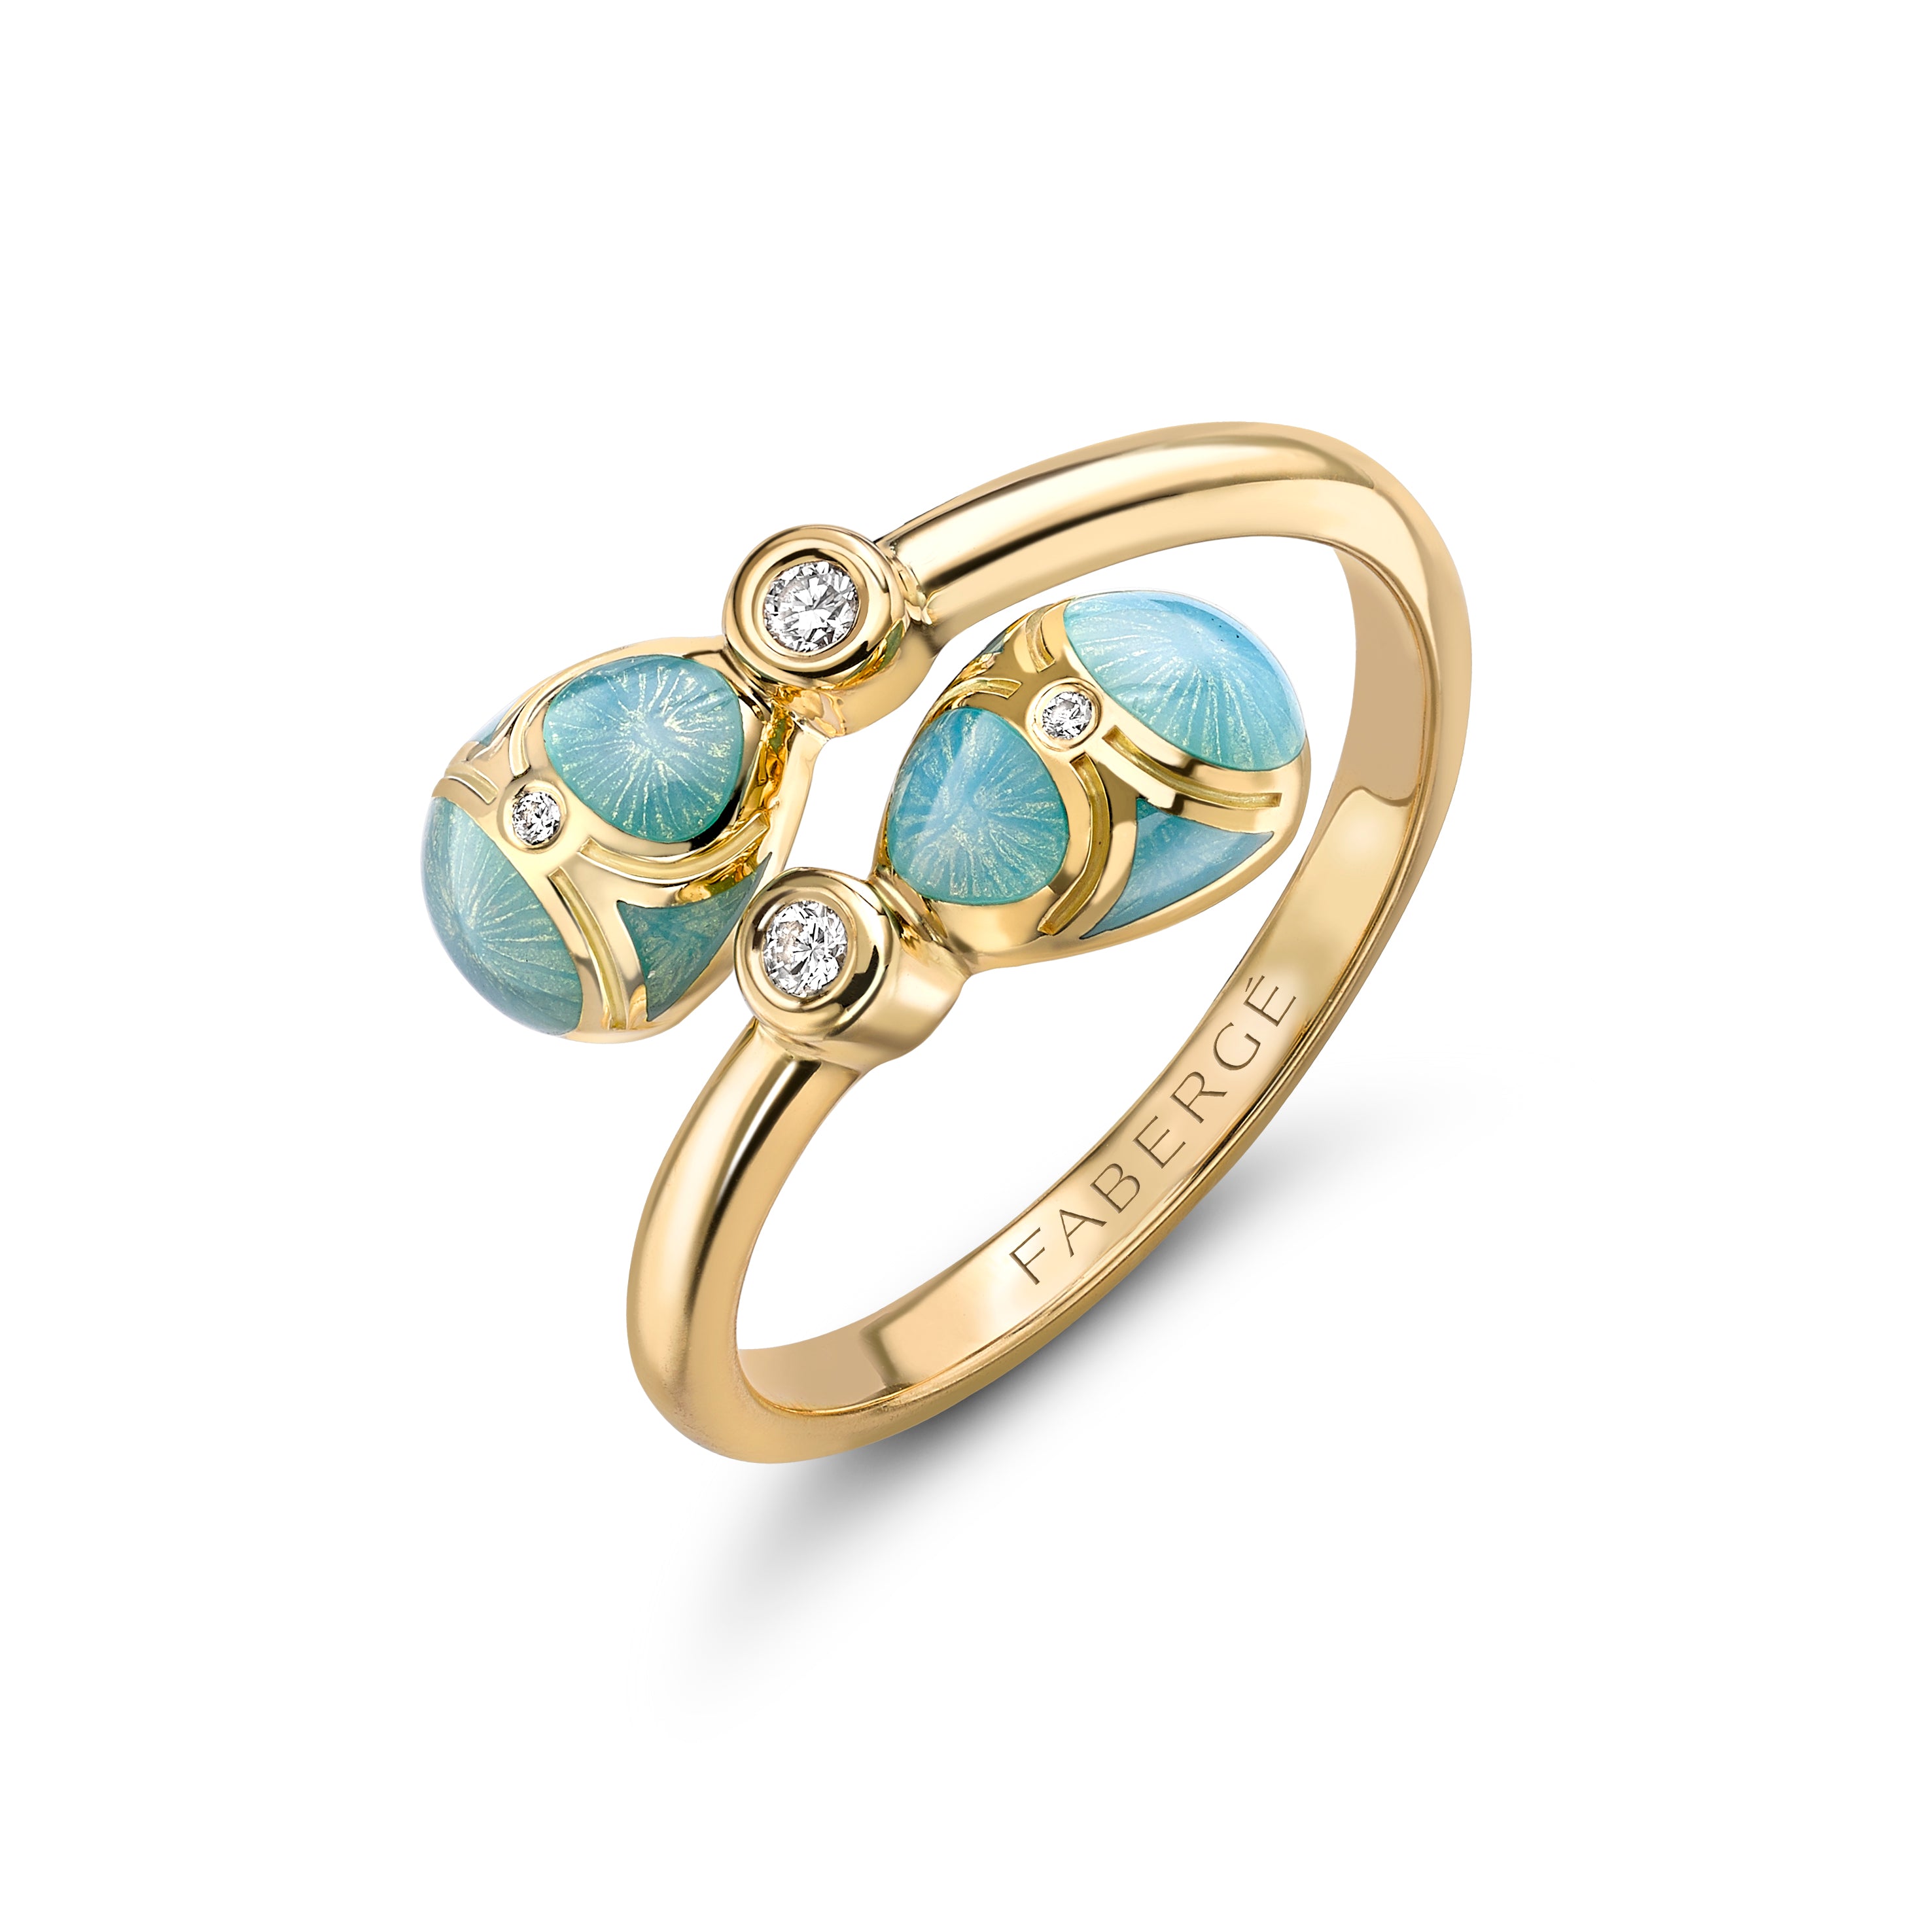 Fabergé Heritage Yellow Gold Diamond & Turquoise Guilloché Enamel Crossover Ring